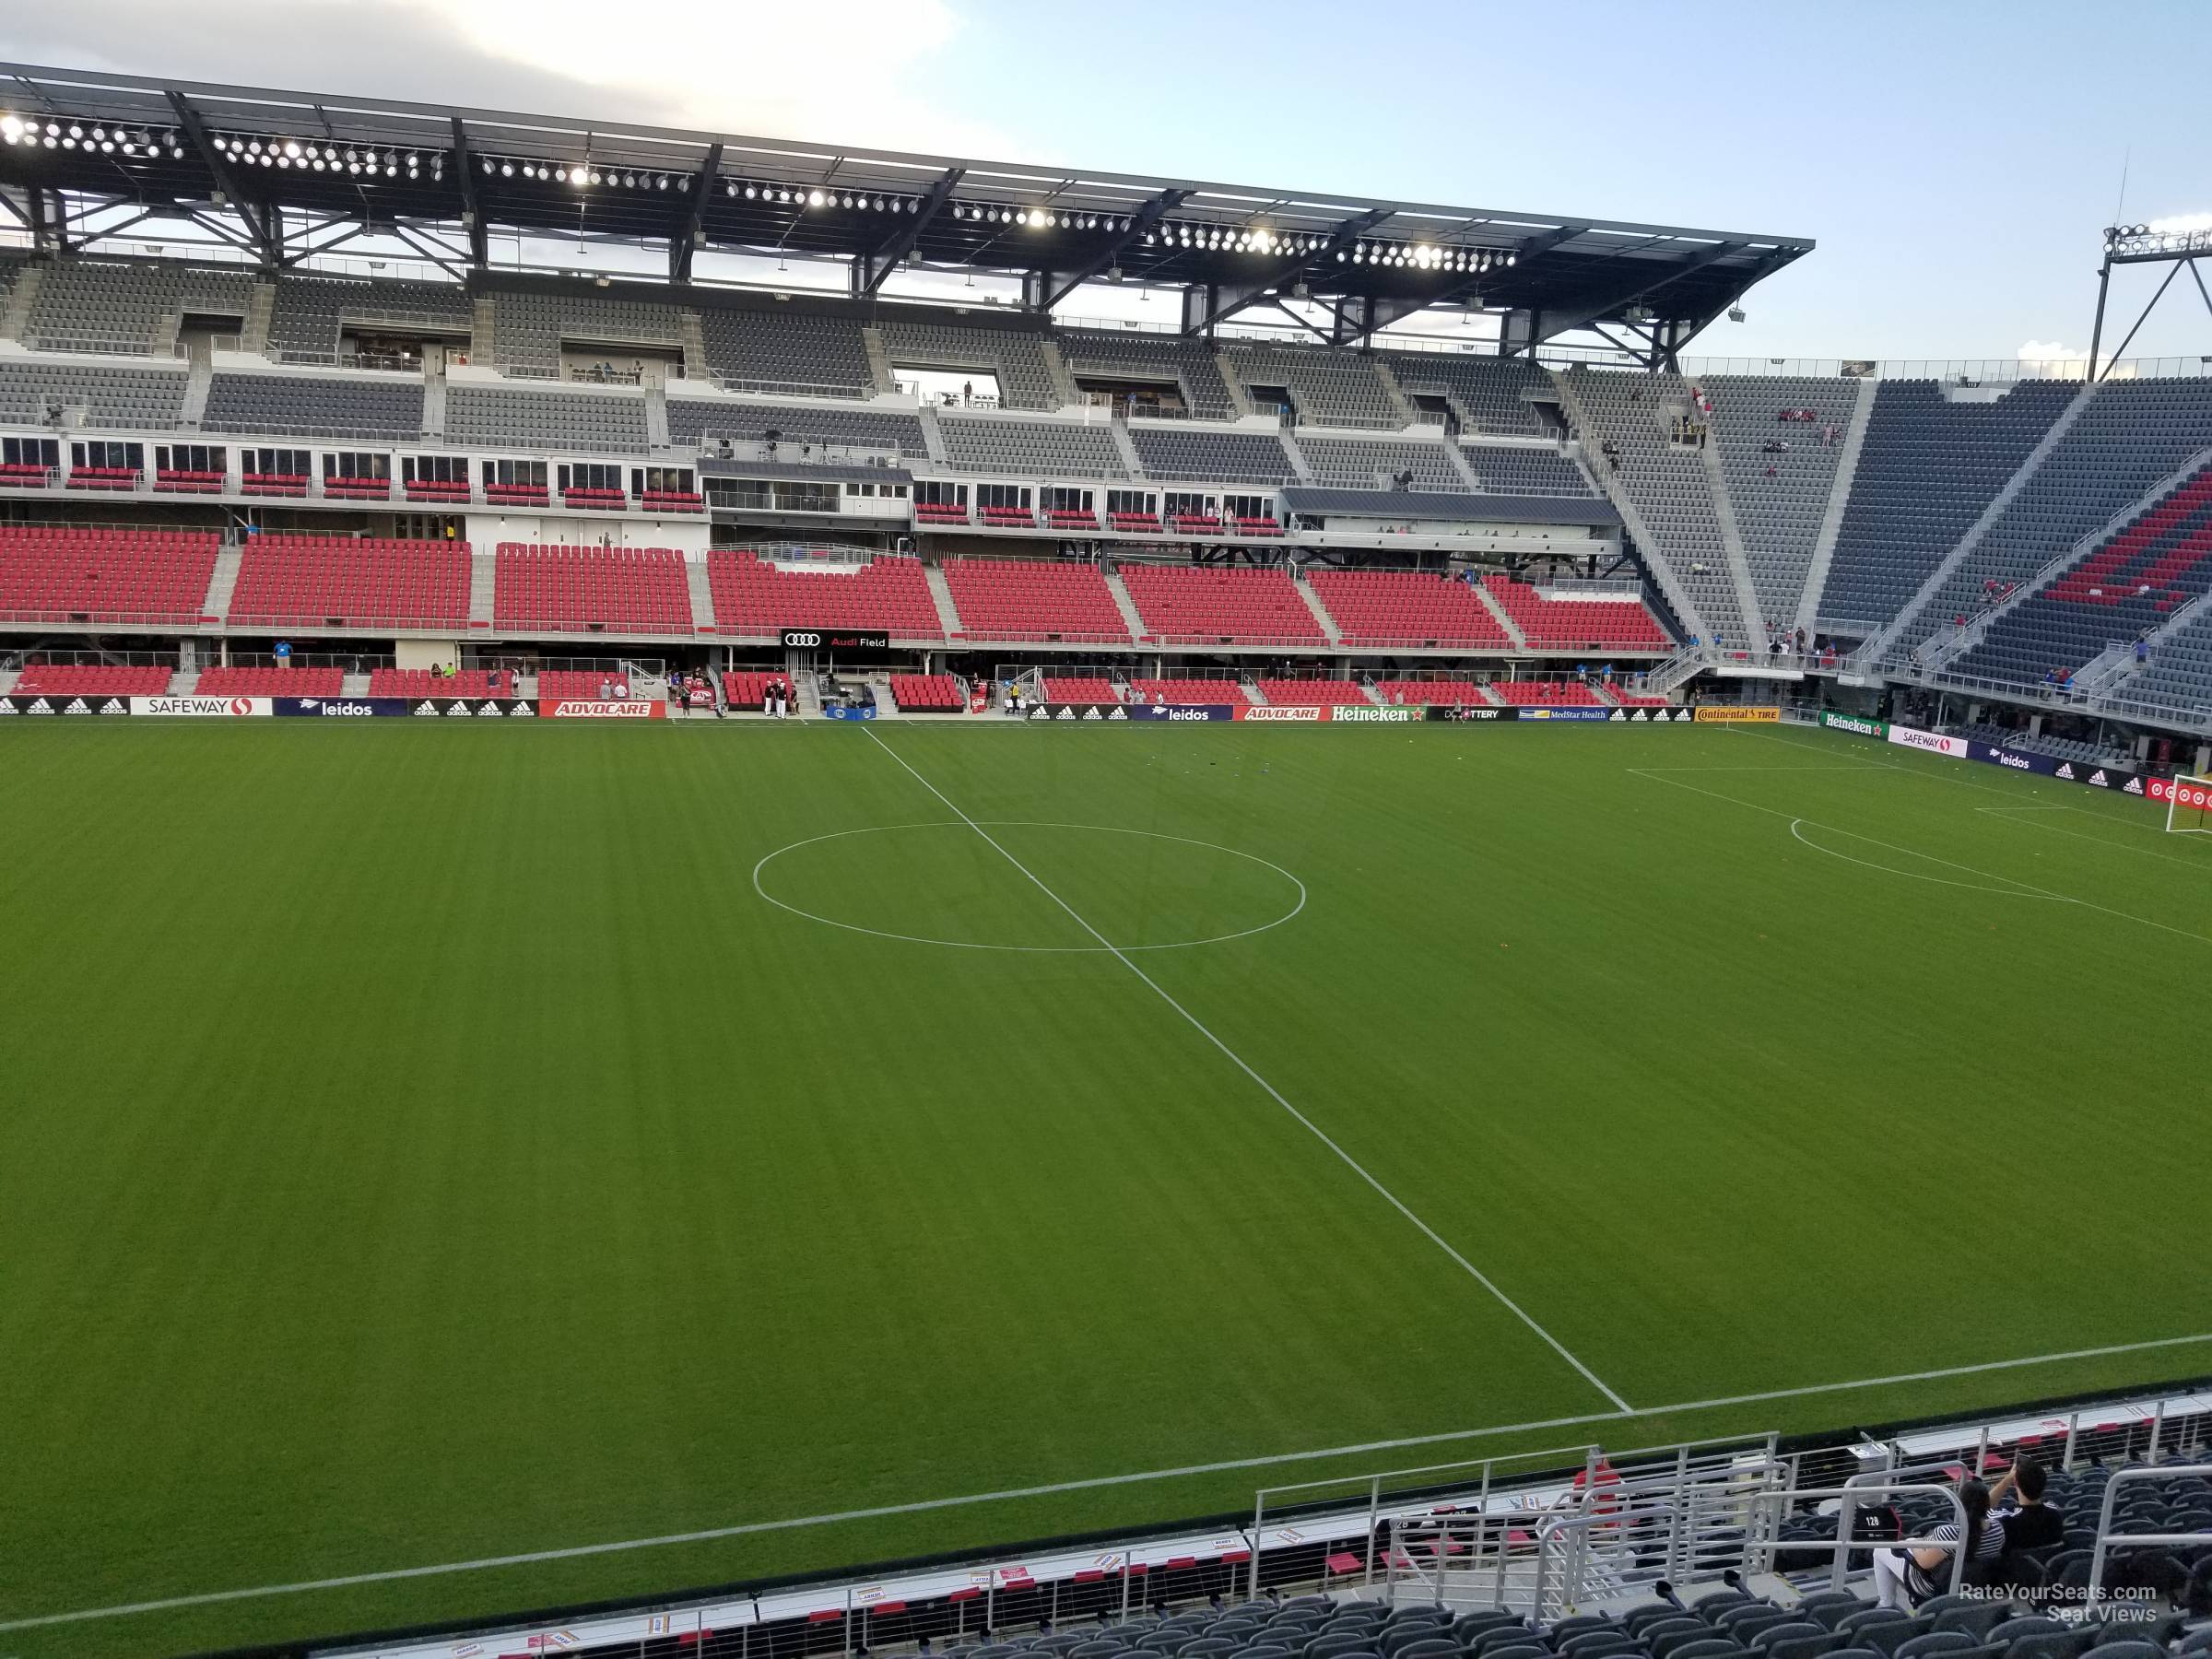 section 128, row 19 seat view  - audi field